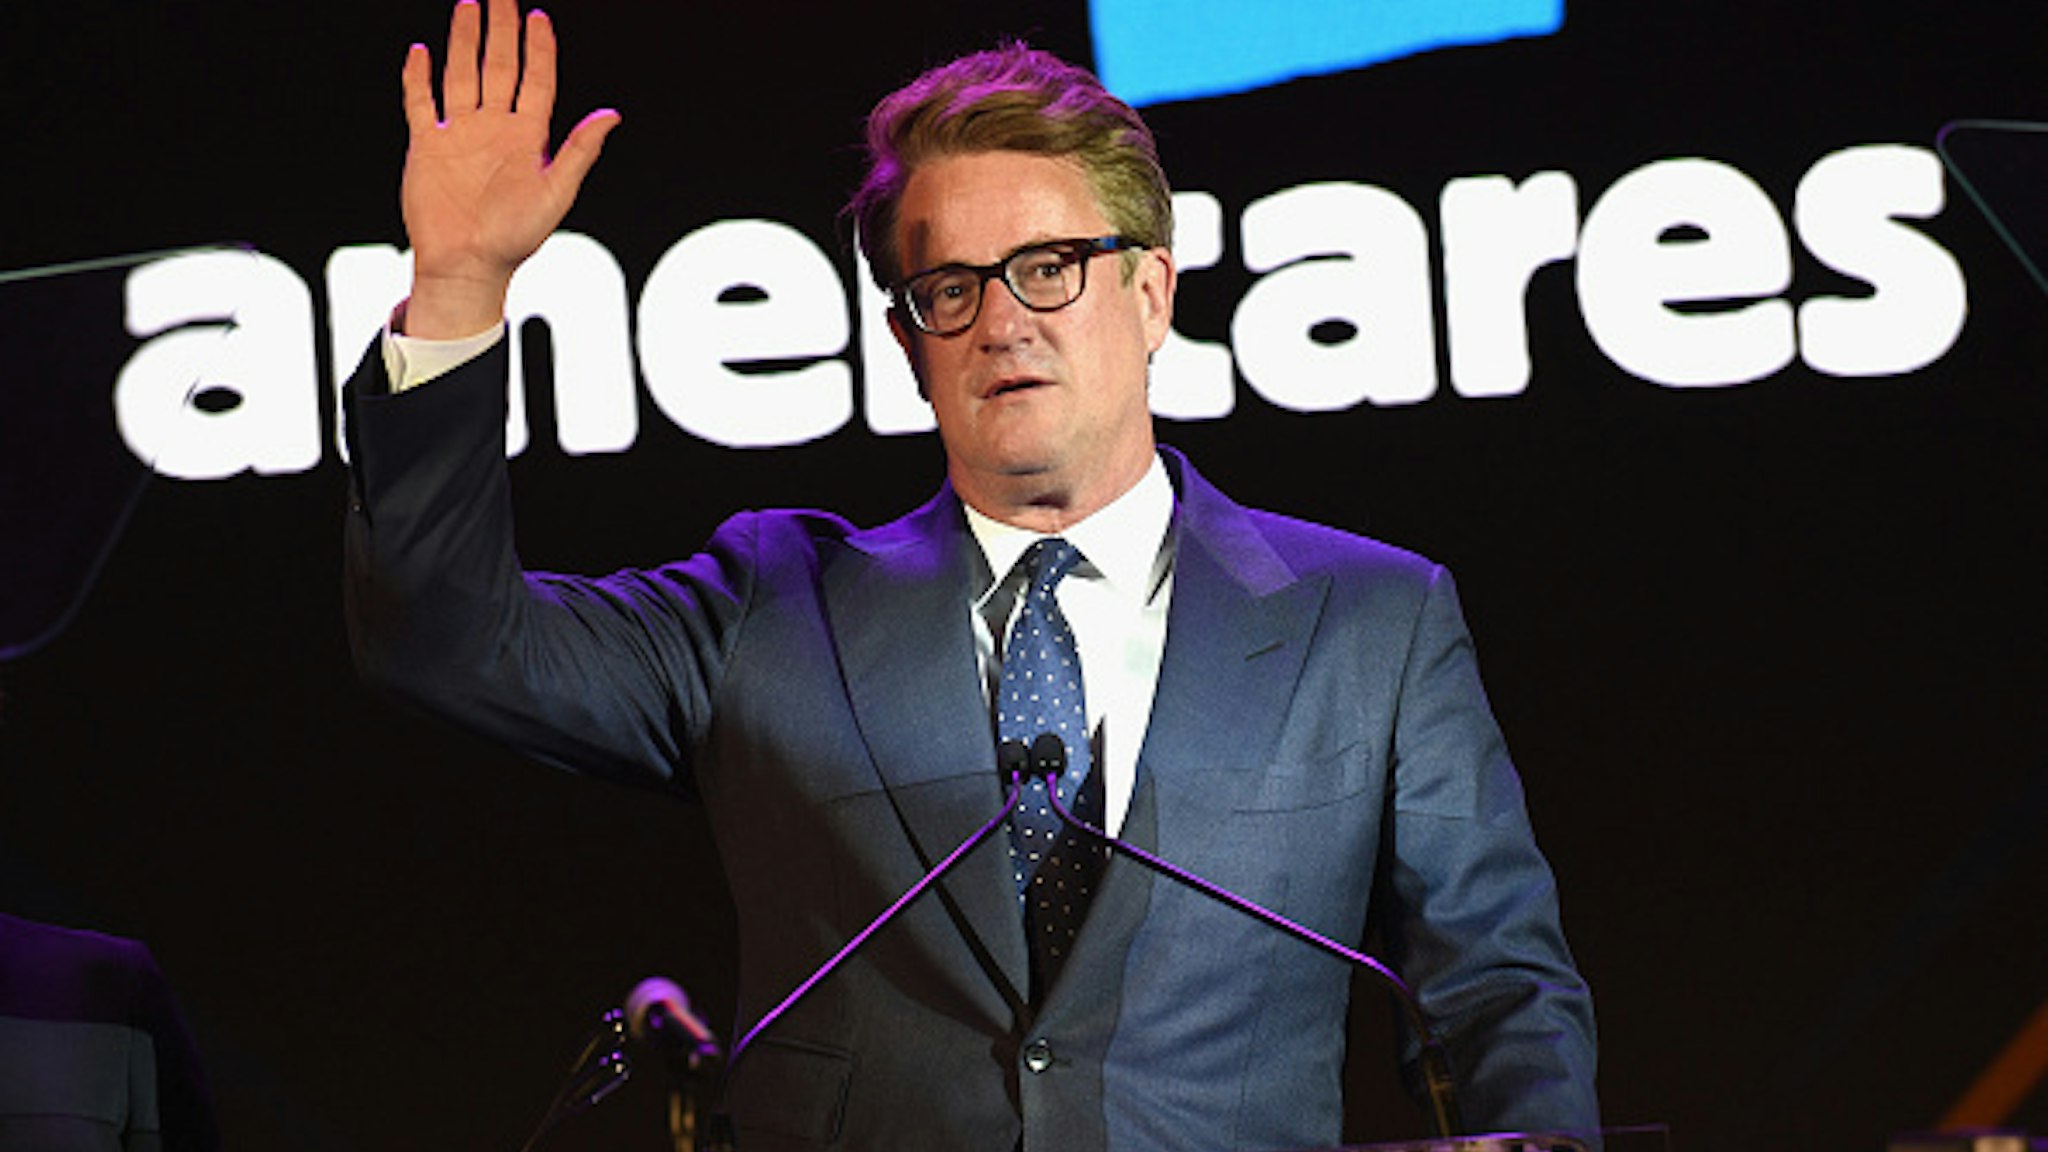 ARMONK, NY - OCTOBER 14: Co-host Joe Scarborough speaks onstage during the 2017 Americares Airlift Benefit at Westchester County Airport on October 14, 2017 in Armonk, New York